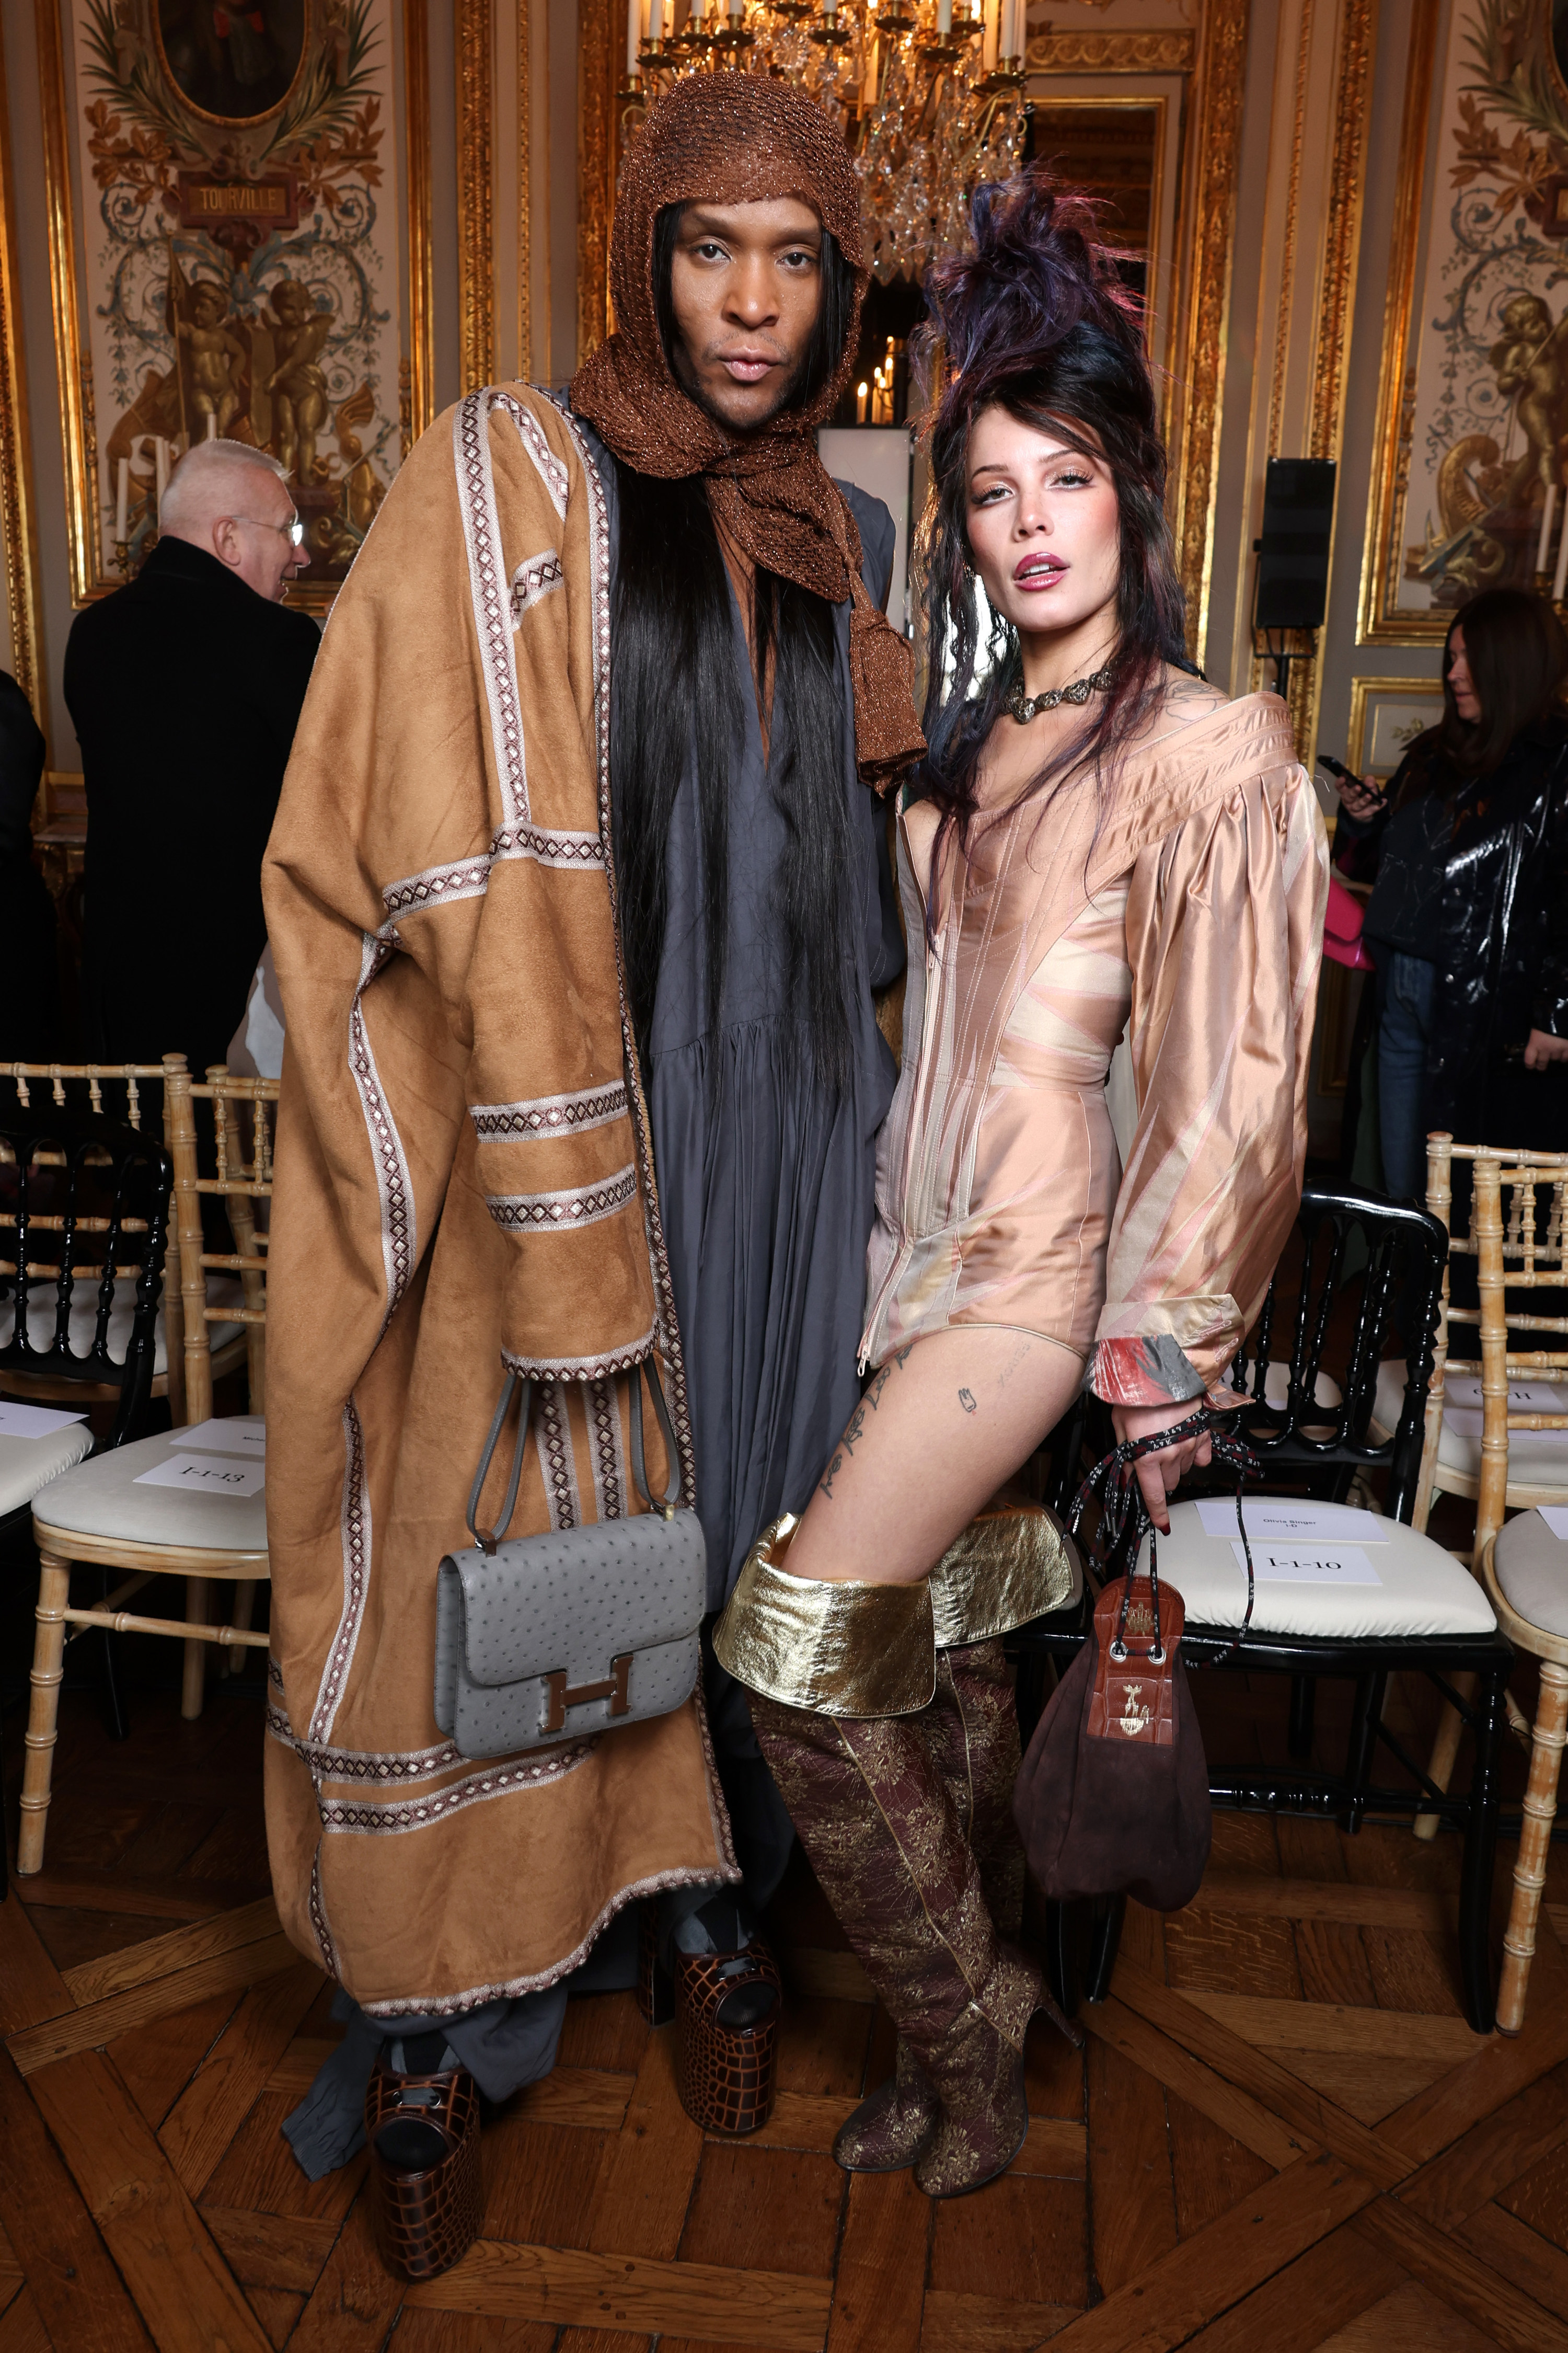 Law and Halsey pose together for a photo at a fashion show